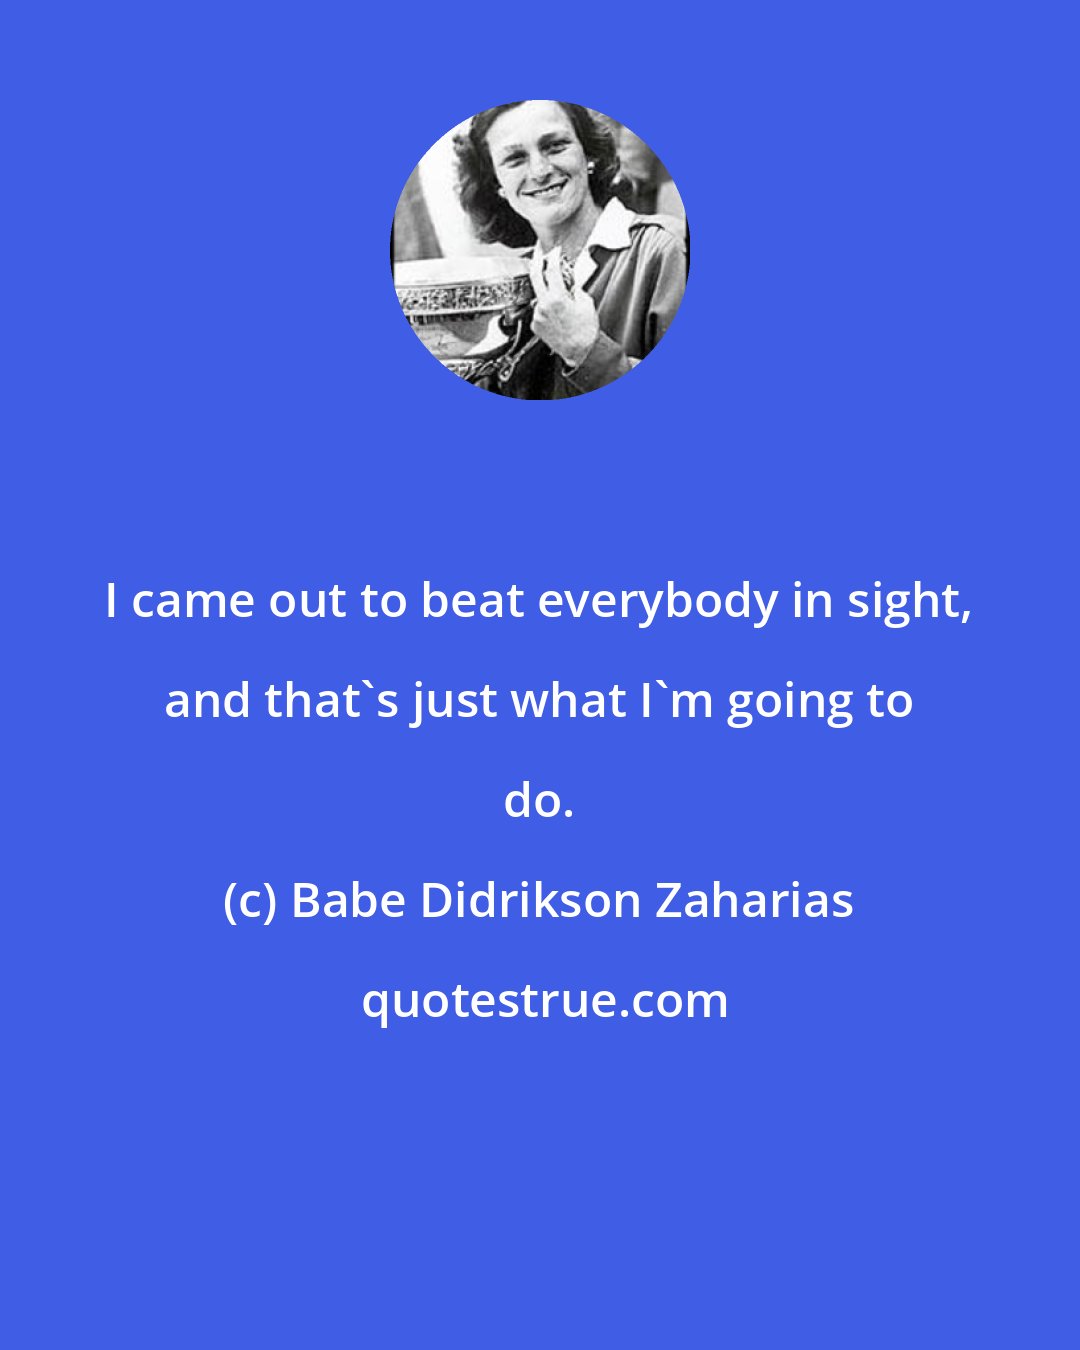 Babe Didrikson Zaharias: I came out to beat everybody in sight, and that's just what I'm going to do.